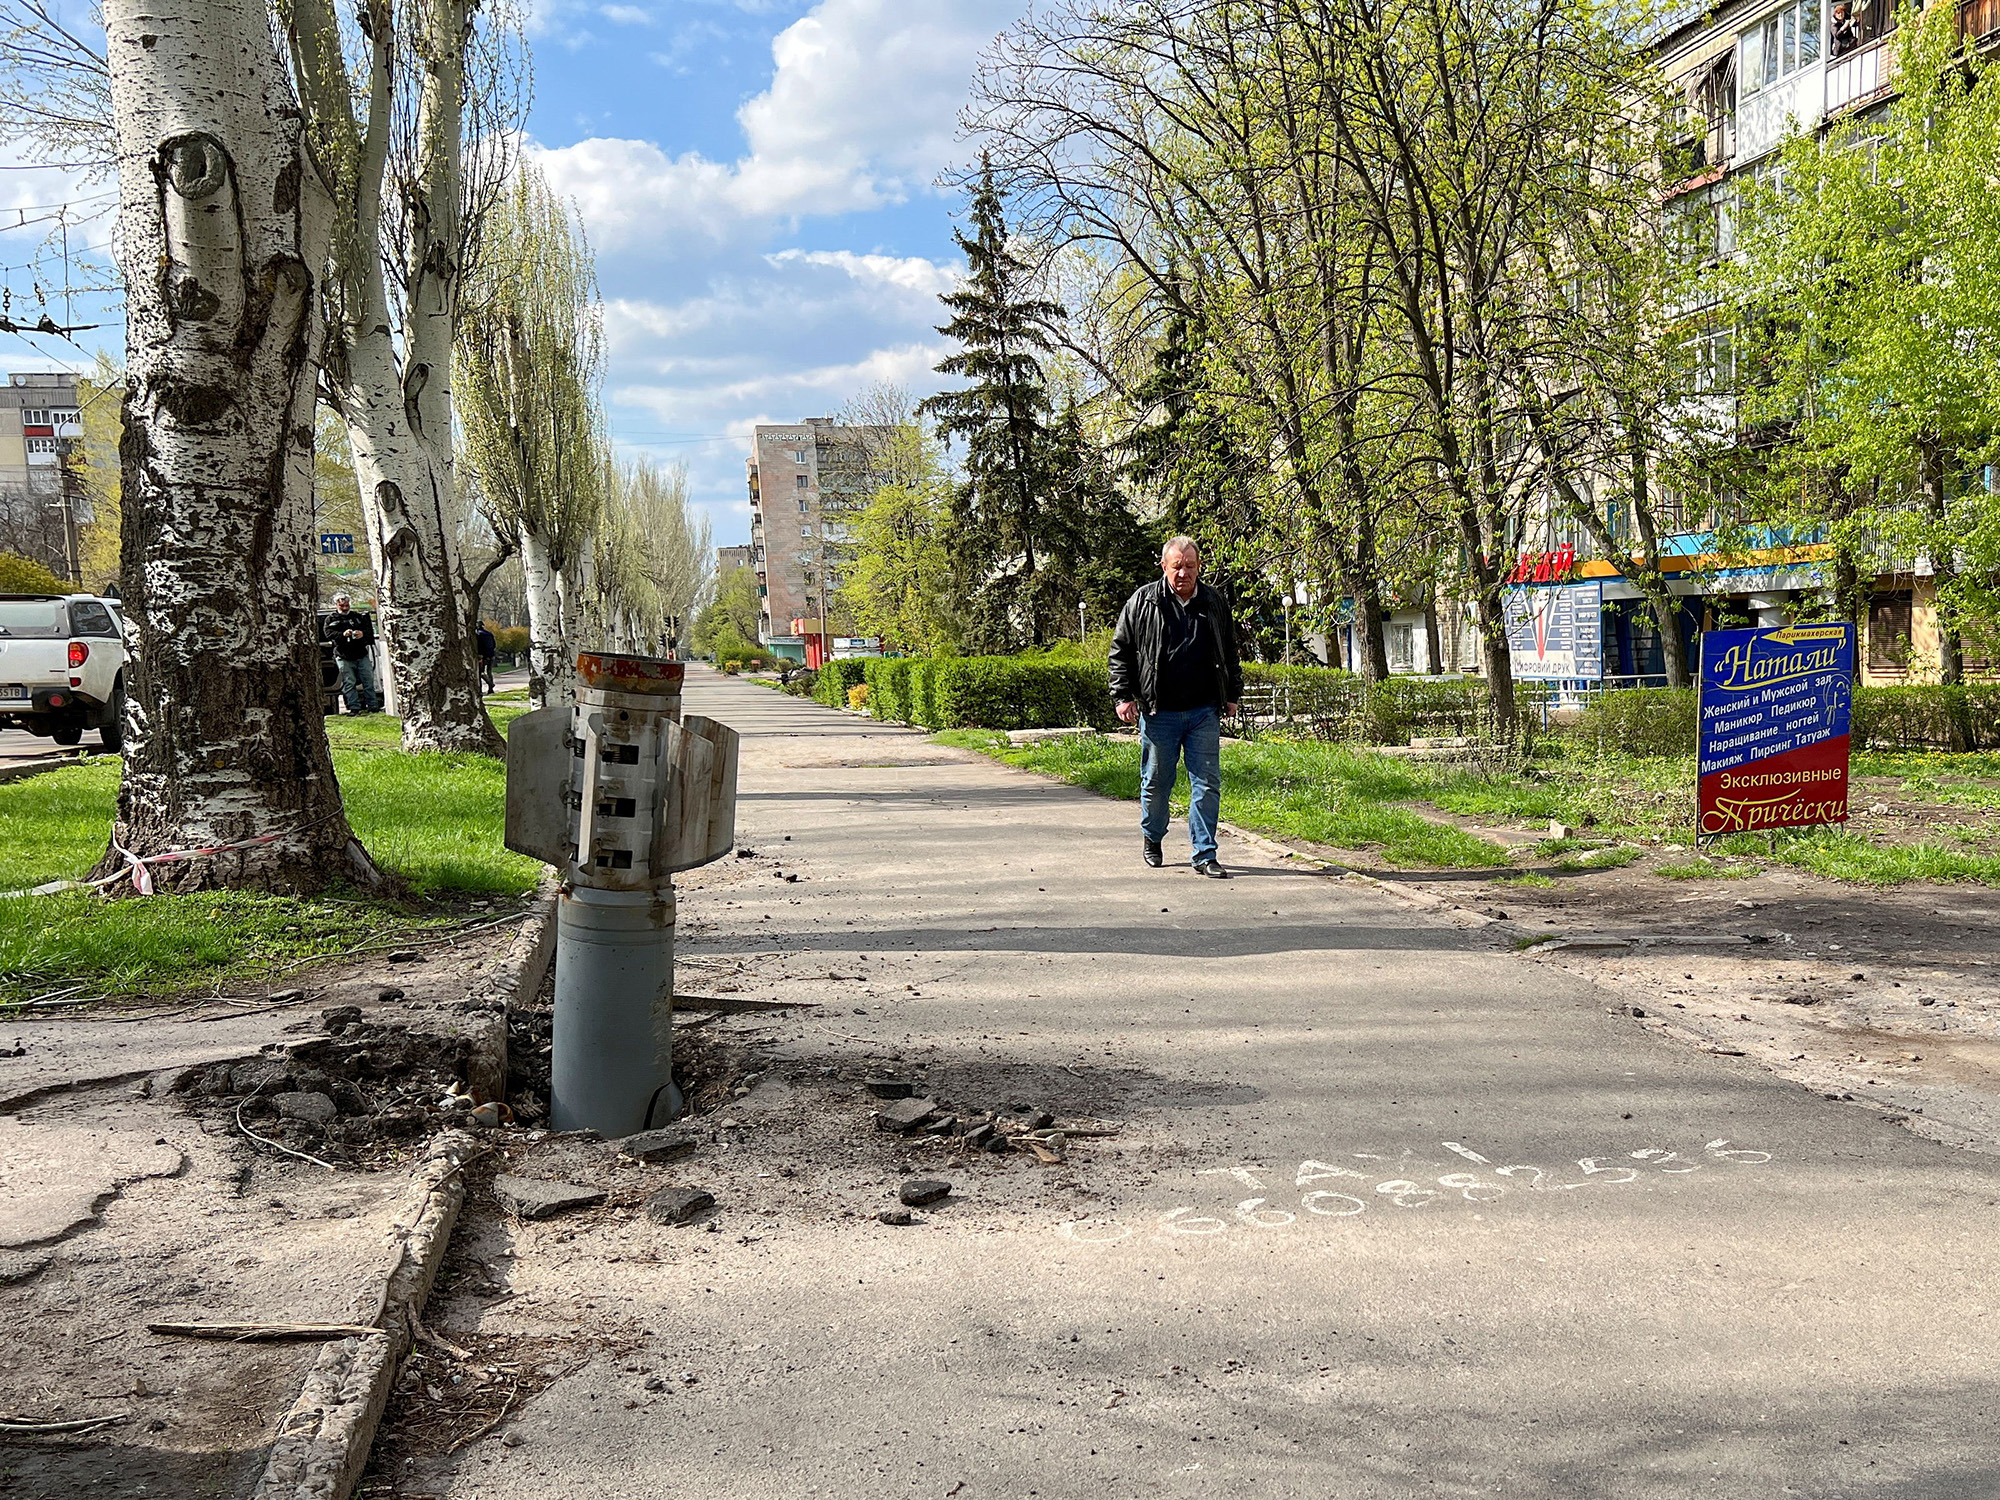 A man walks past a missile that lodged in the ground in Rubizhne in the Luhansk region of Ukraine, on April 21.